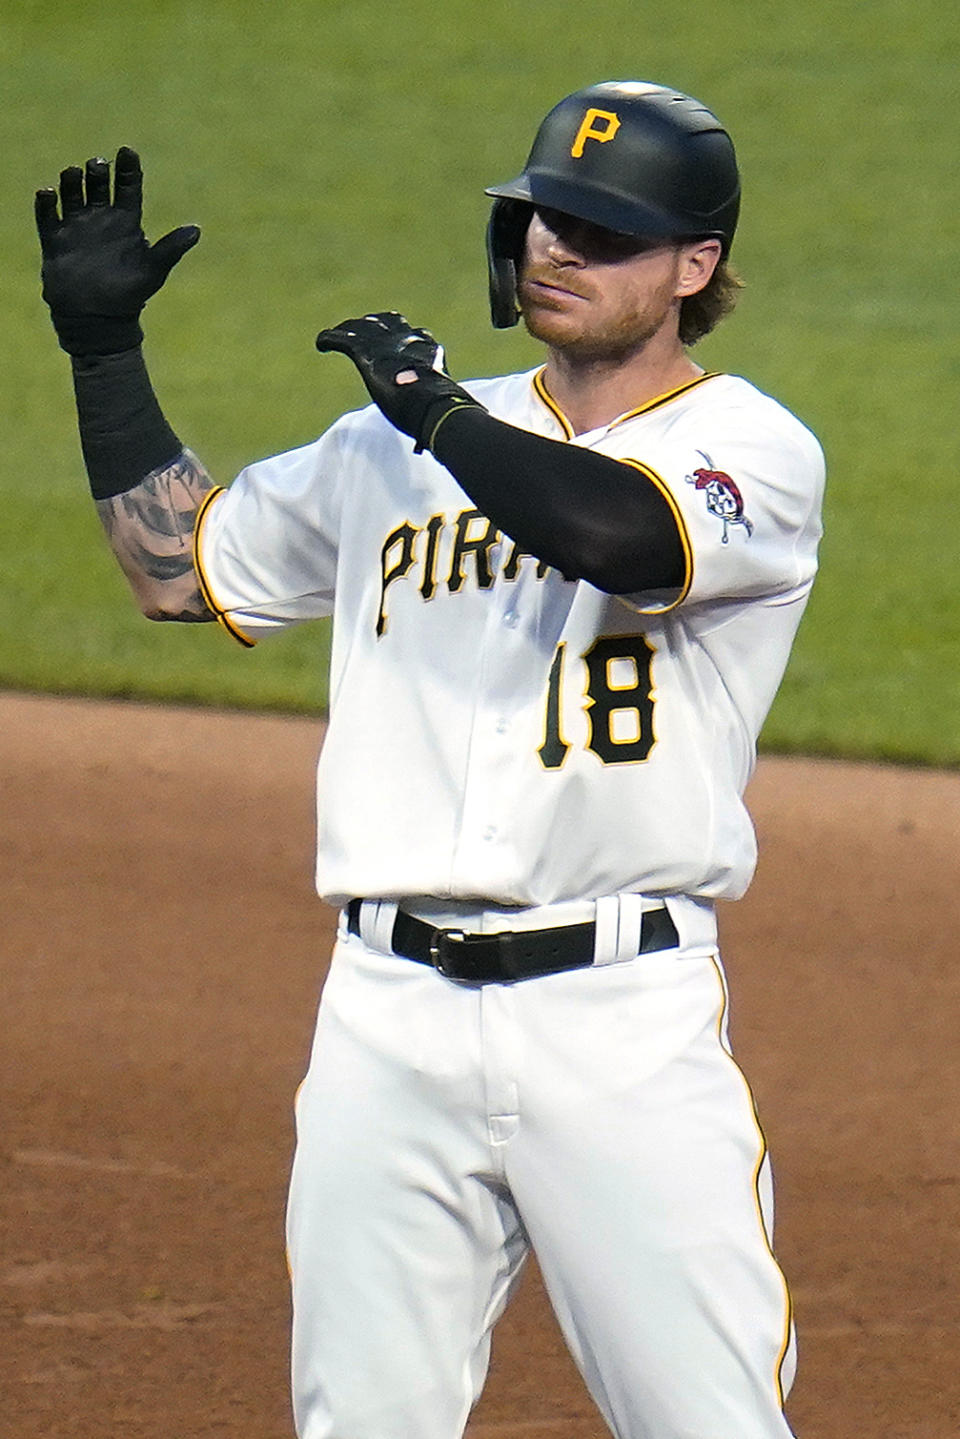 Pittsburgh Pirates' Ben Gamel celebrates on second base after driving in a run with a double off New York Yankees starting pitcher Jameson Taillon during the fourth inning of a baseball game in Pittsburgh, Tuesday, July 5, 2022. (AP Photo/Gene J. Puskar)